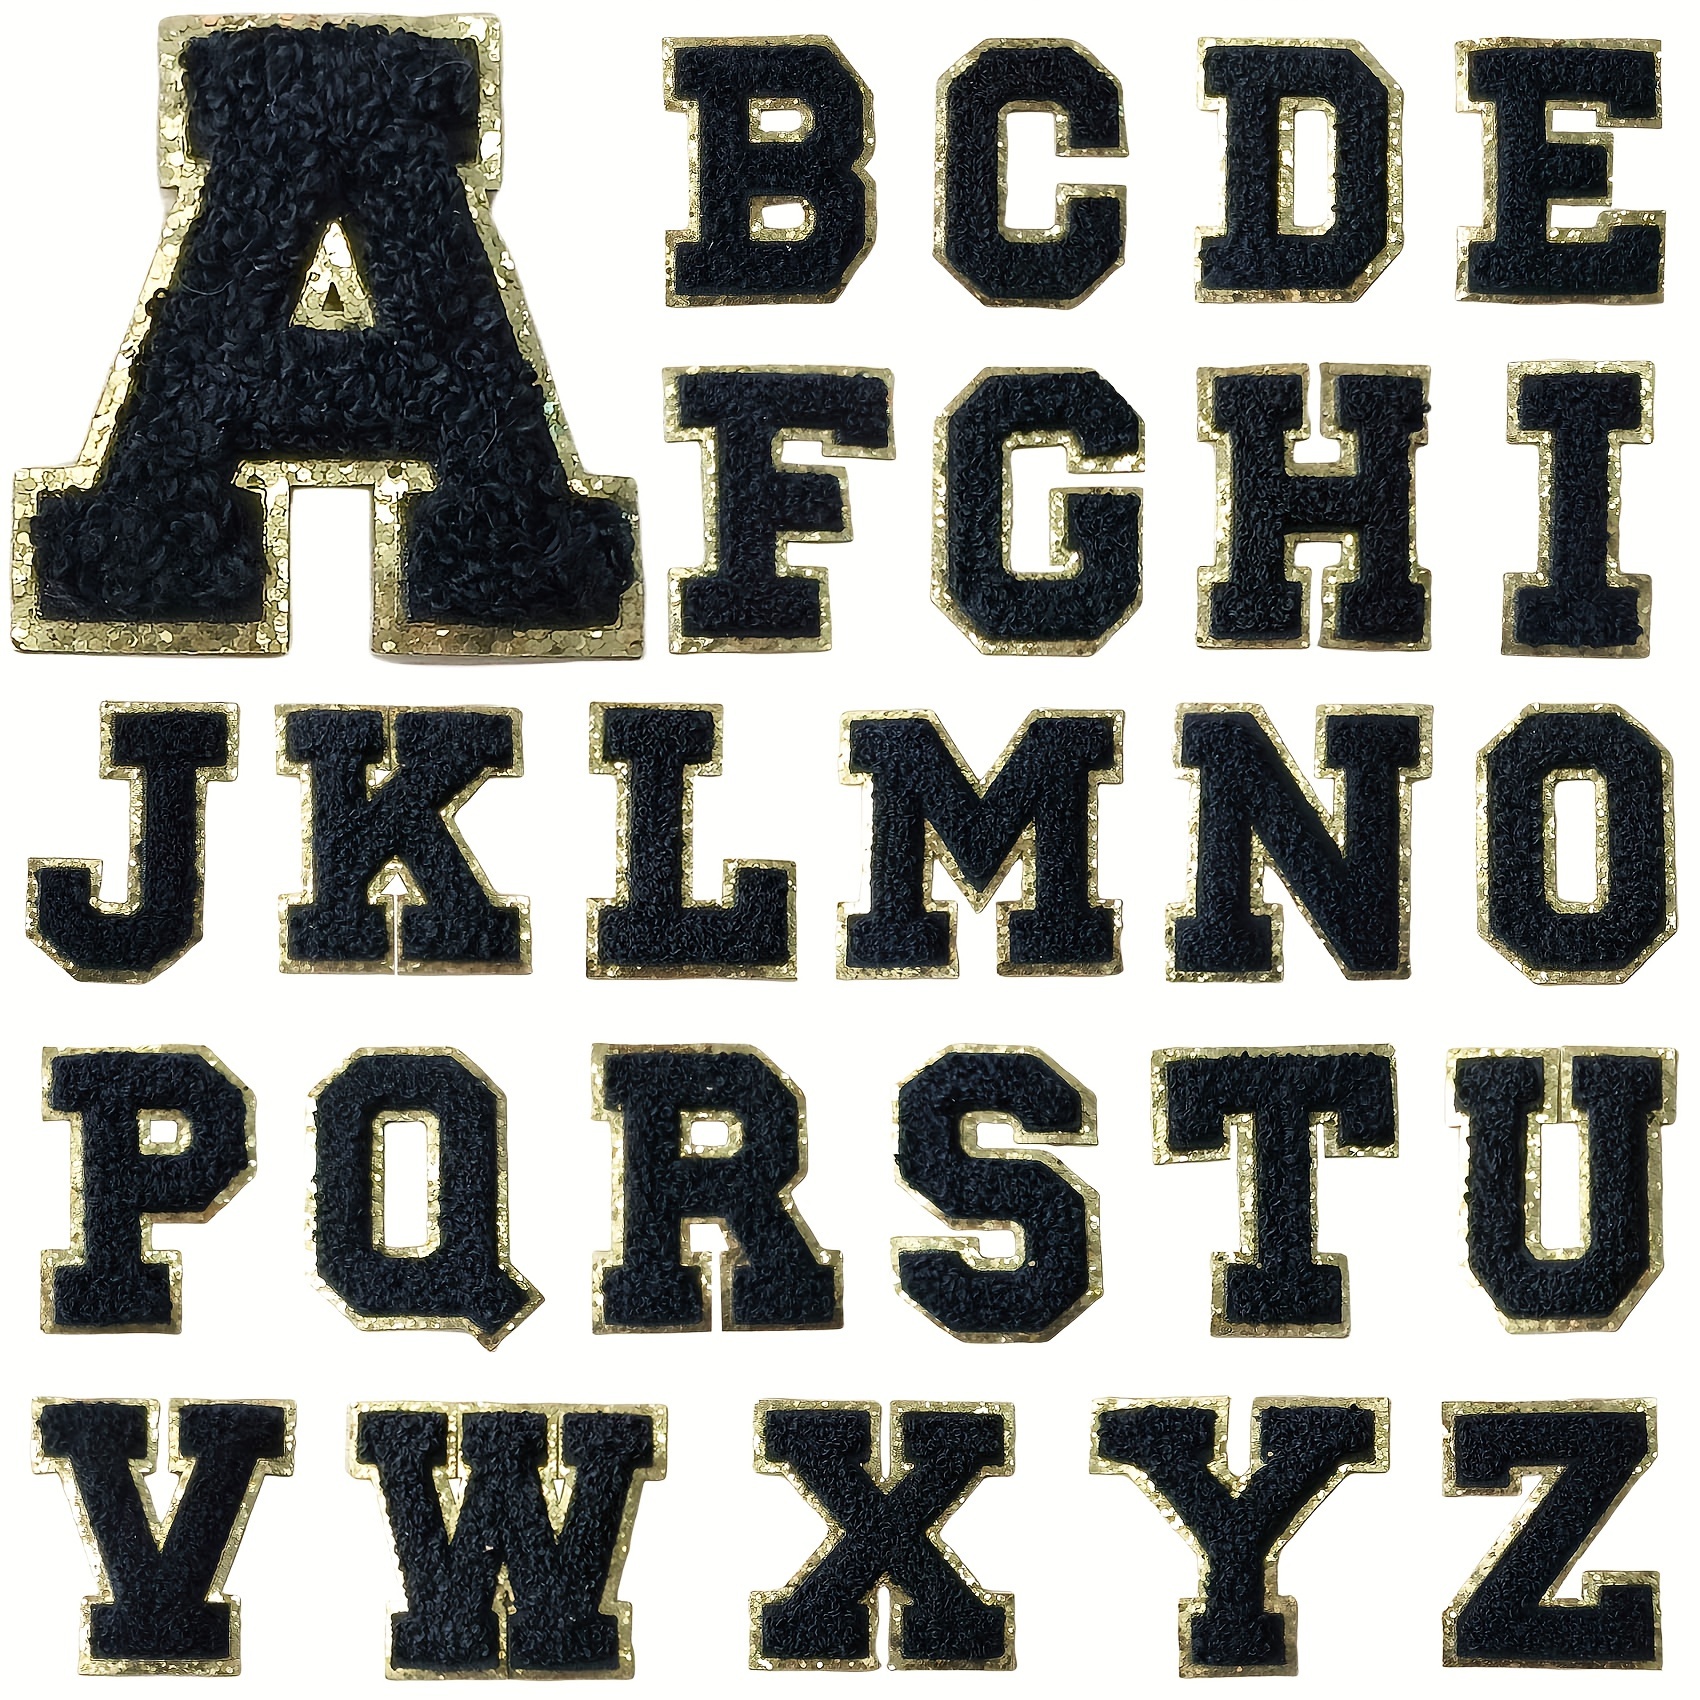 Self-Adhesive Iron on Letters Chenille Patches: 26PCS Baseball Letter  Patches Stickers Varsity Letter Patches for Clothing Jackets Backpacks Hats